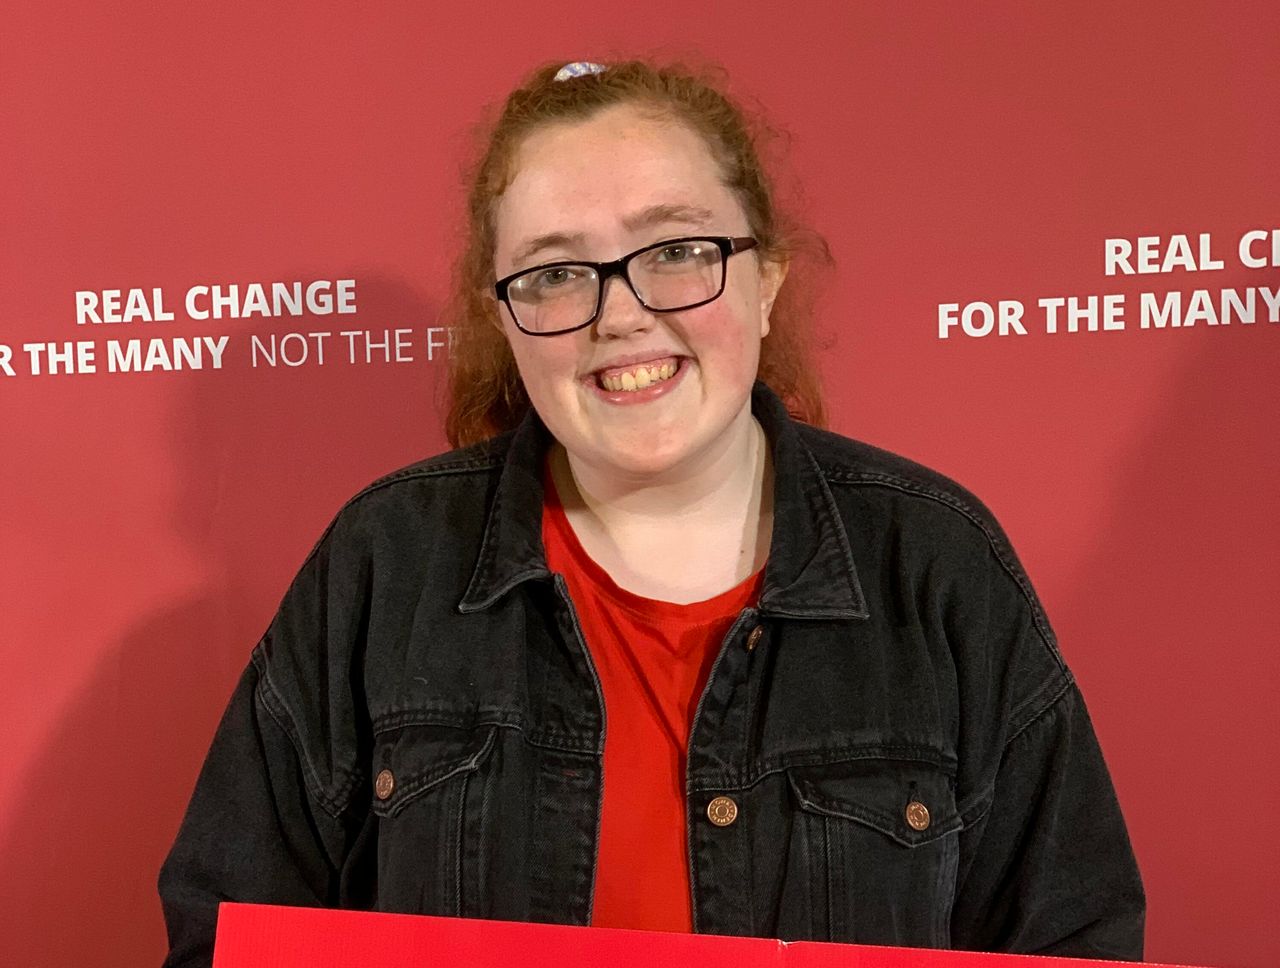 Labour's candidate for Stirling is 19-year-old Mary Kate Ross